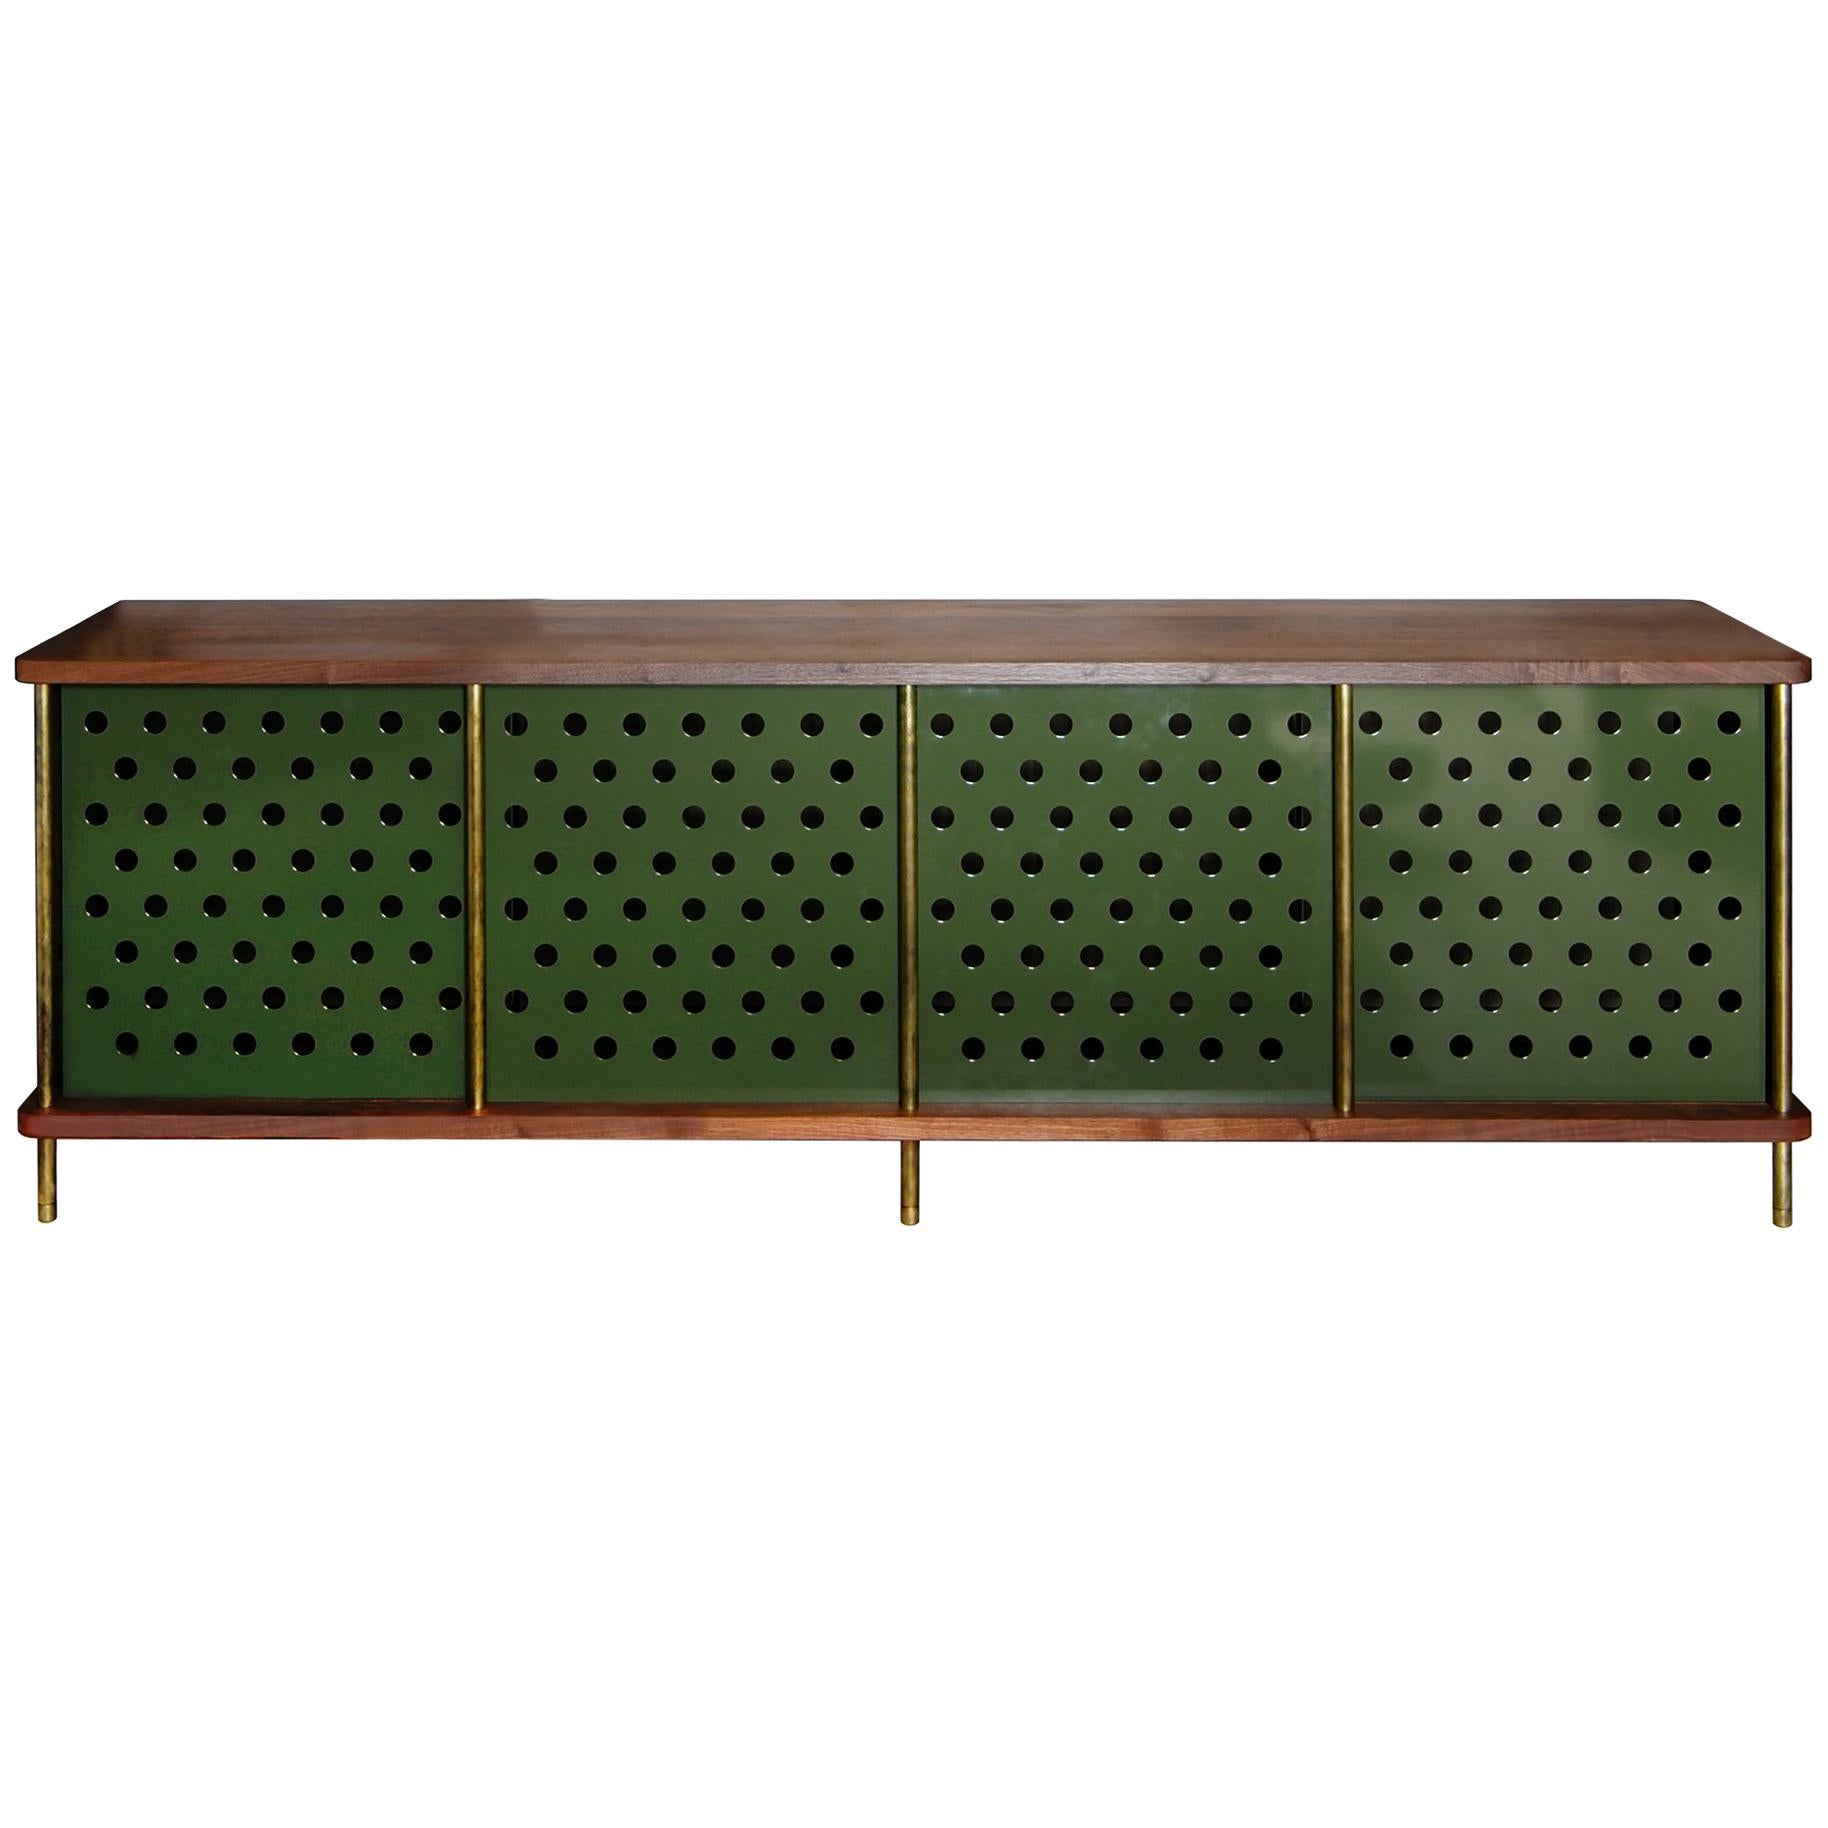 Strata Credenza with No Shelves in Walnut and Brass by Fort Standard, in Stock